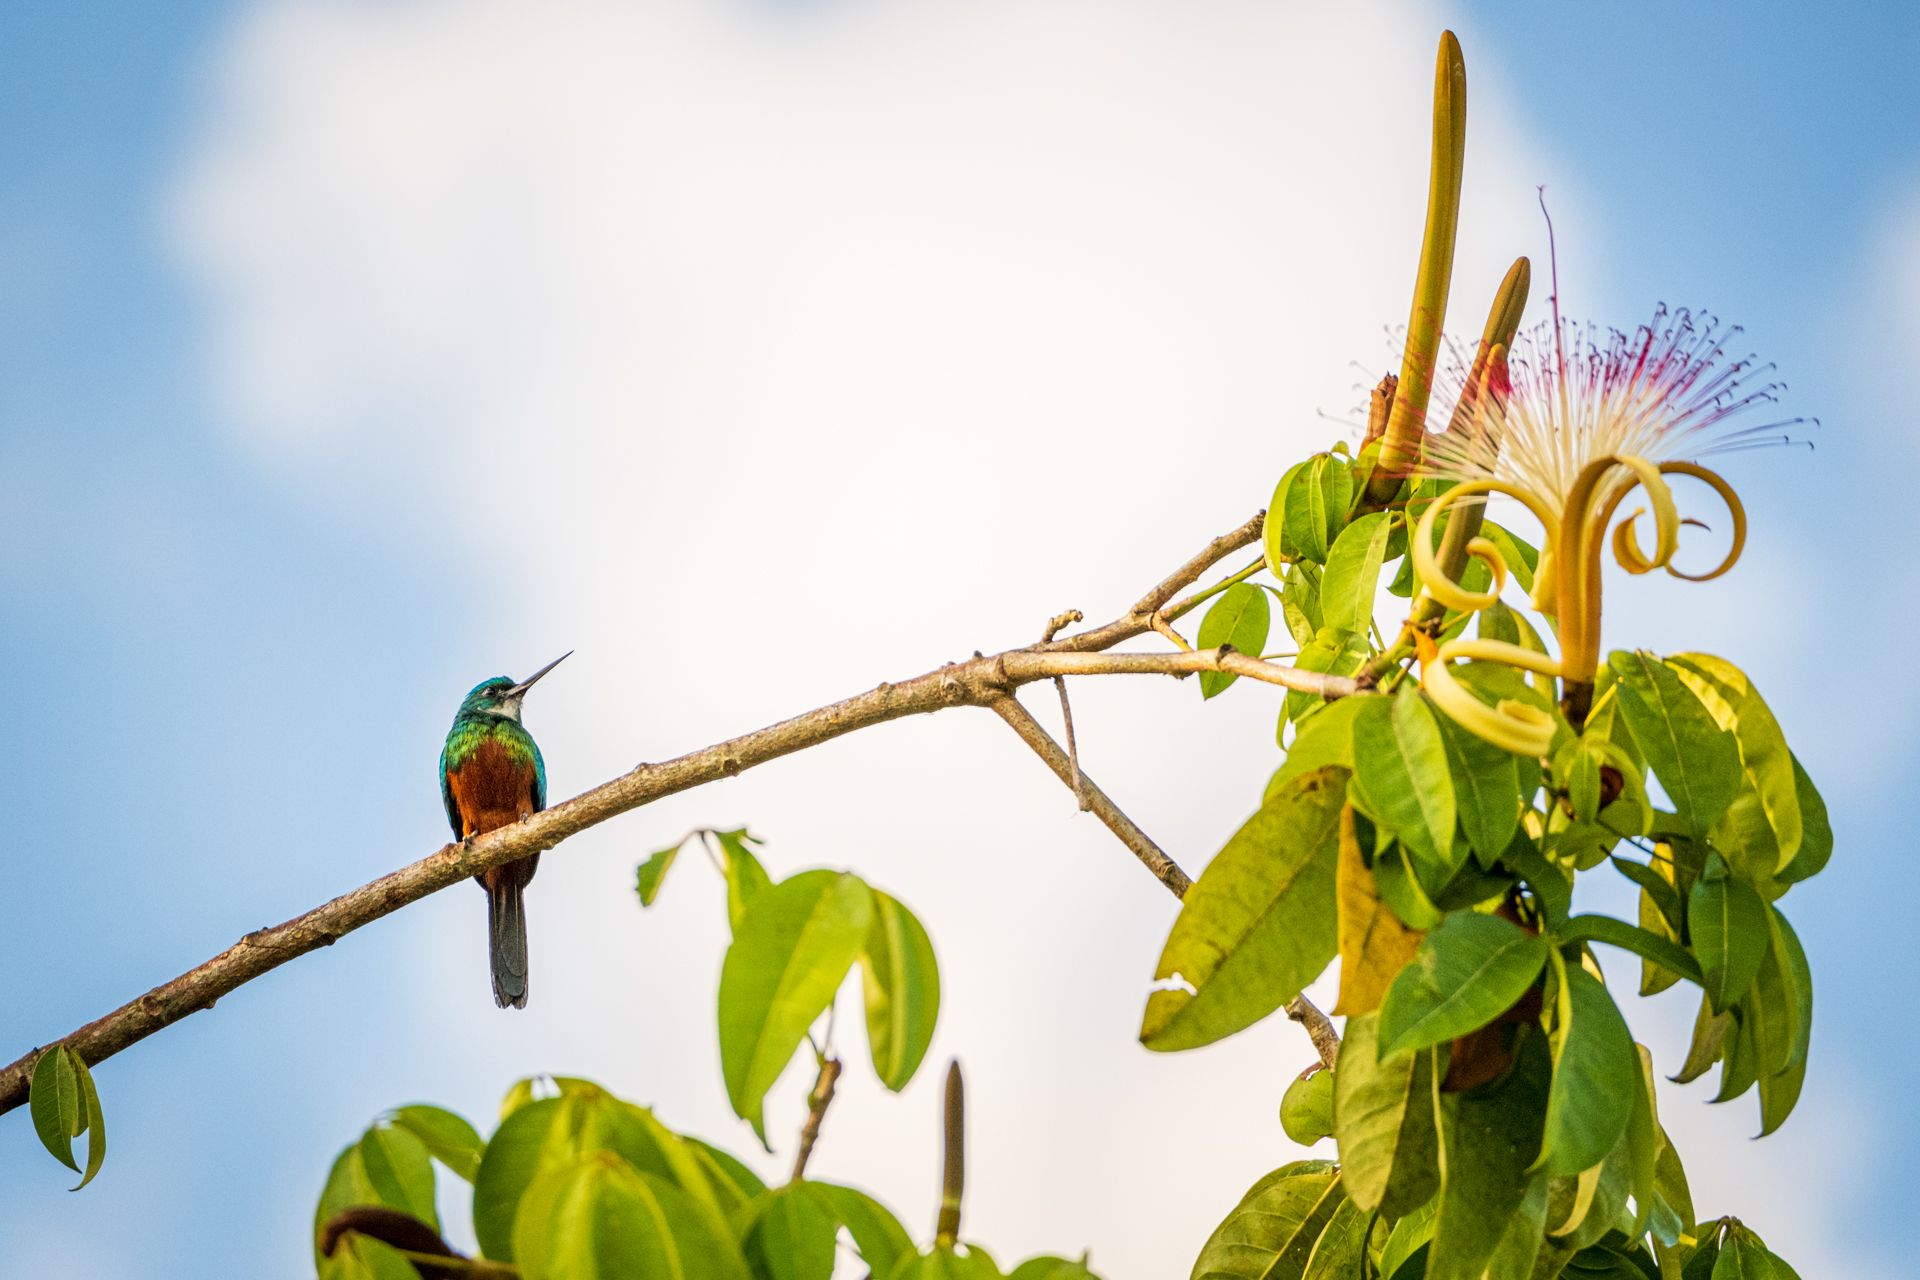 Hummingbird perched on a branch on Guyana.